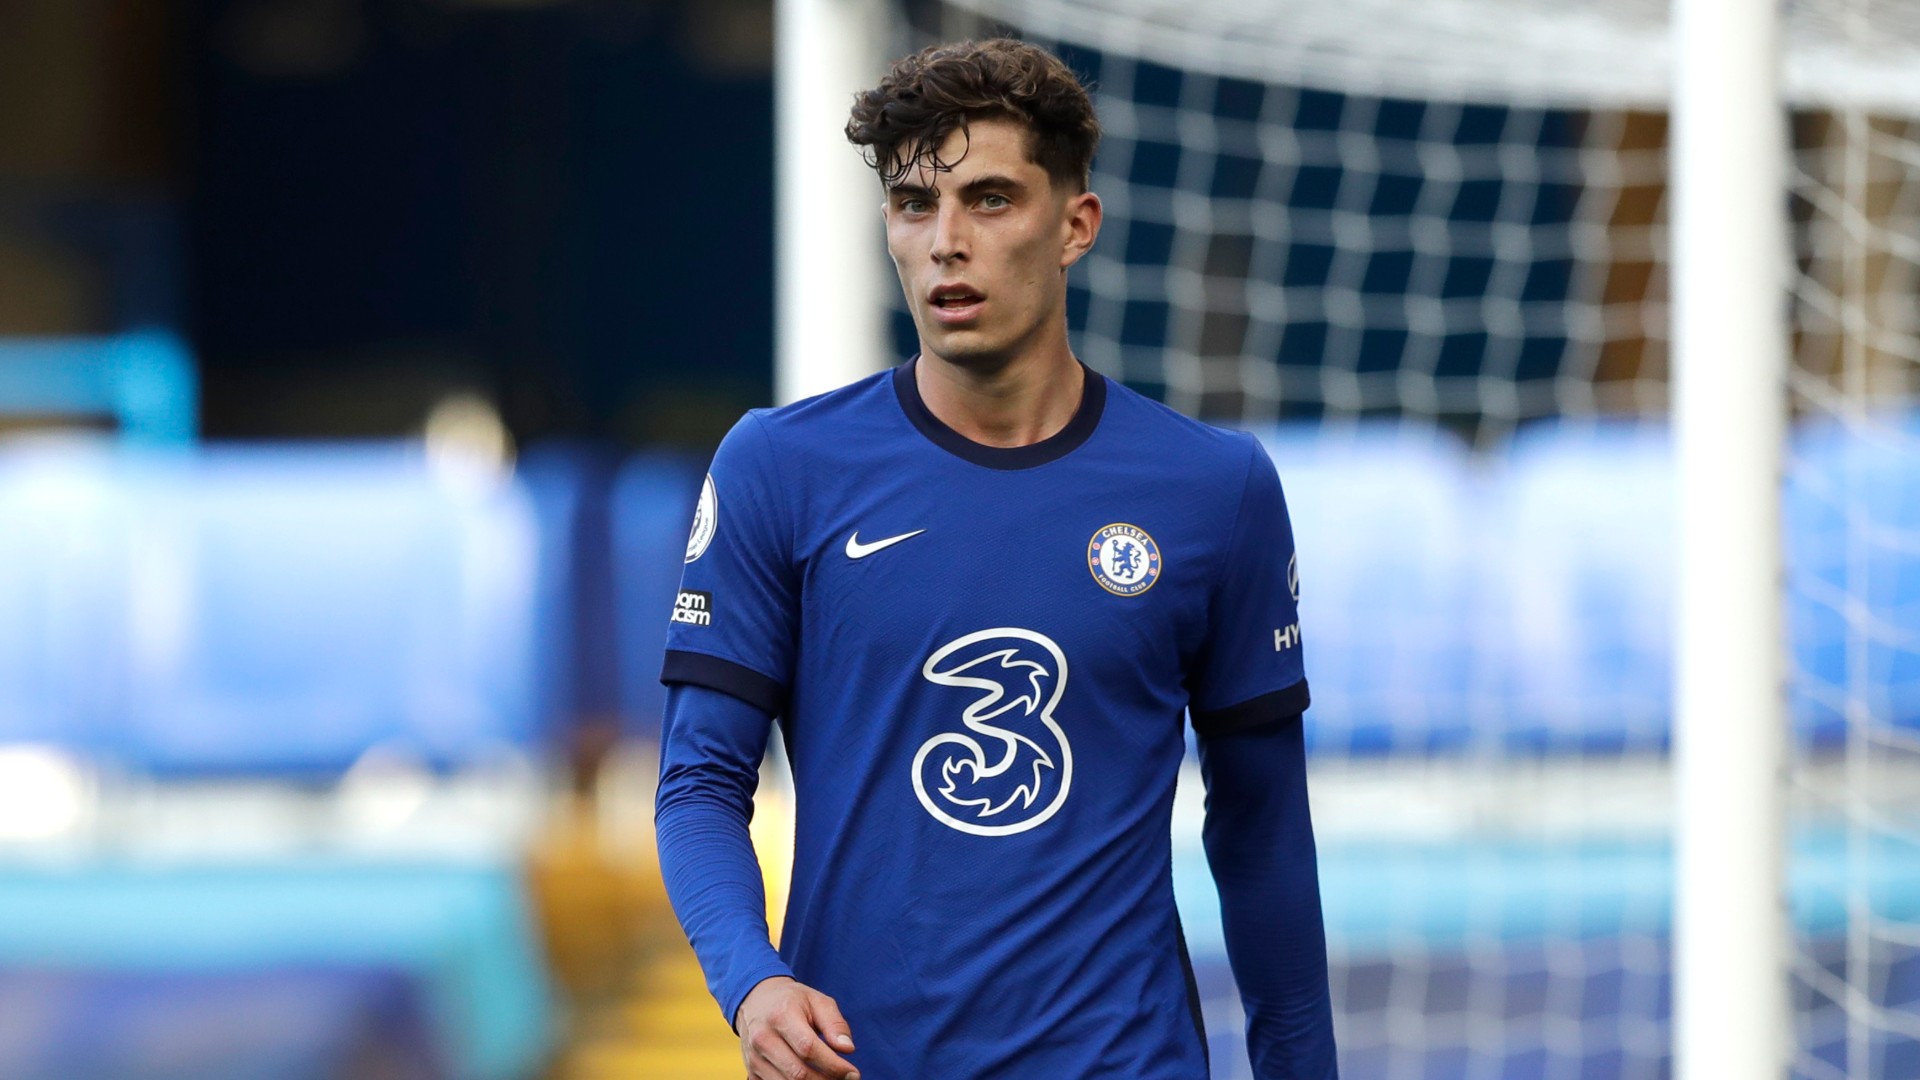 Chelsea don’t know what to do with Havertz – Carragher questions summer signing